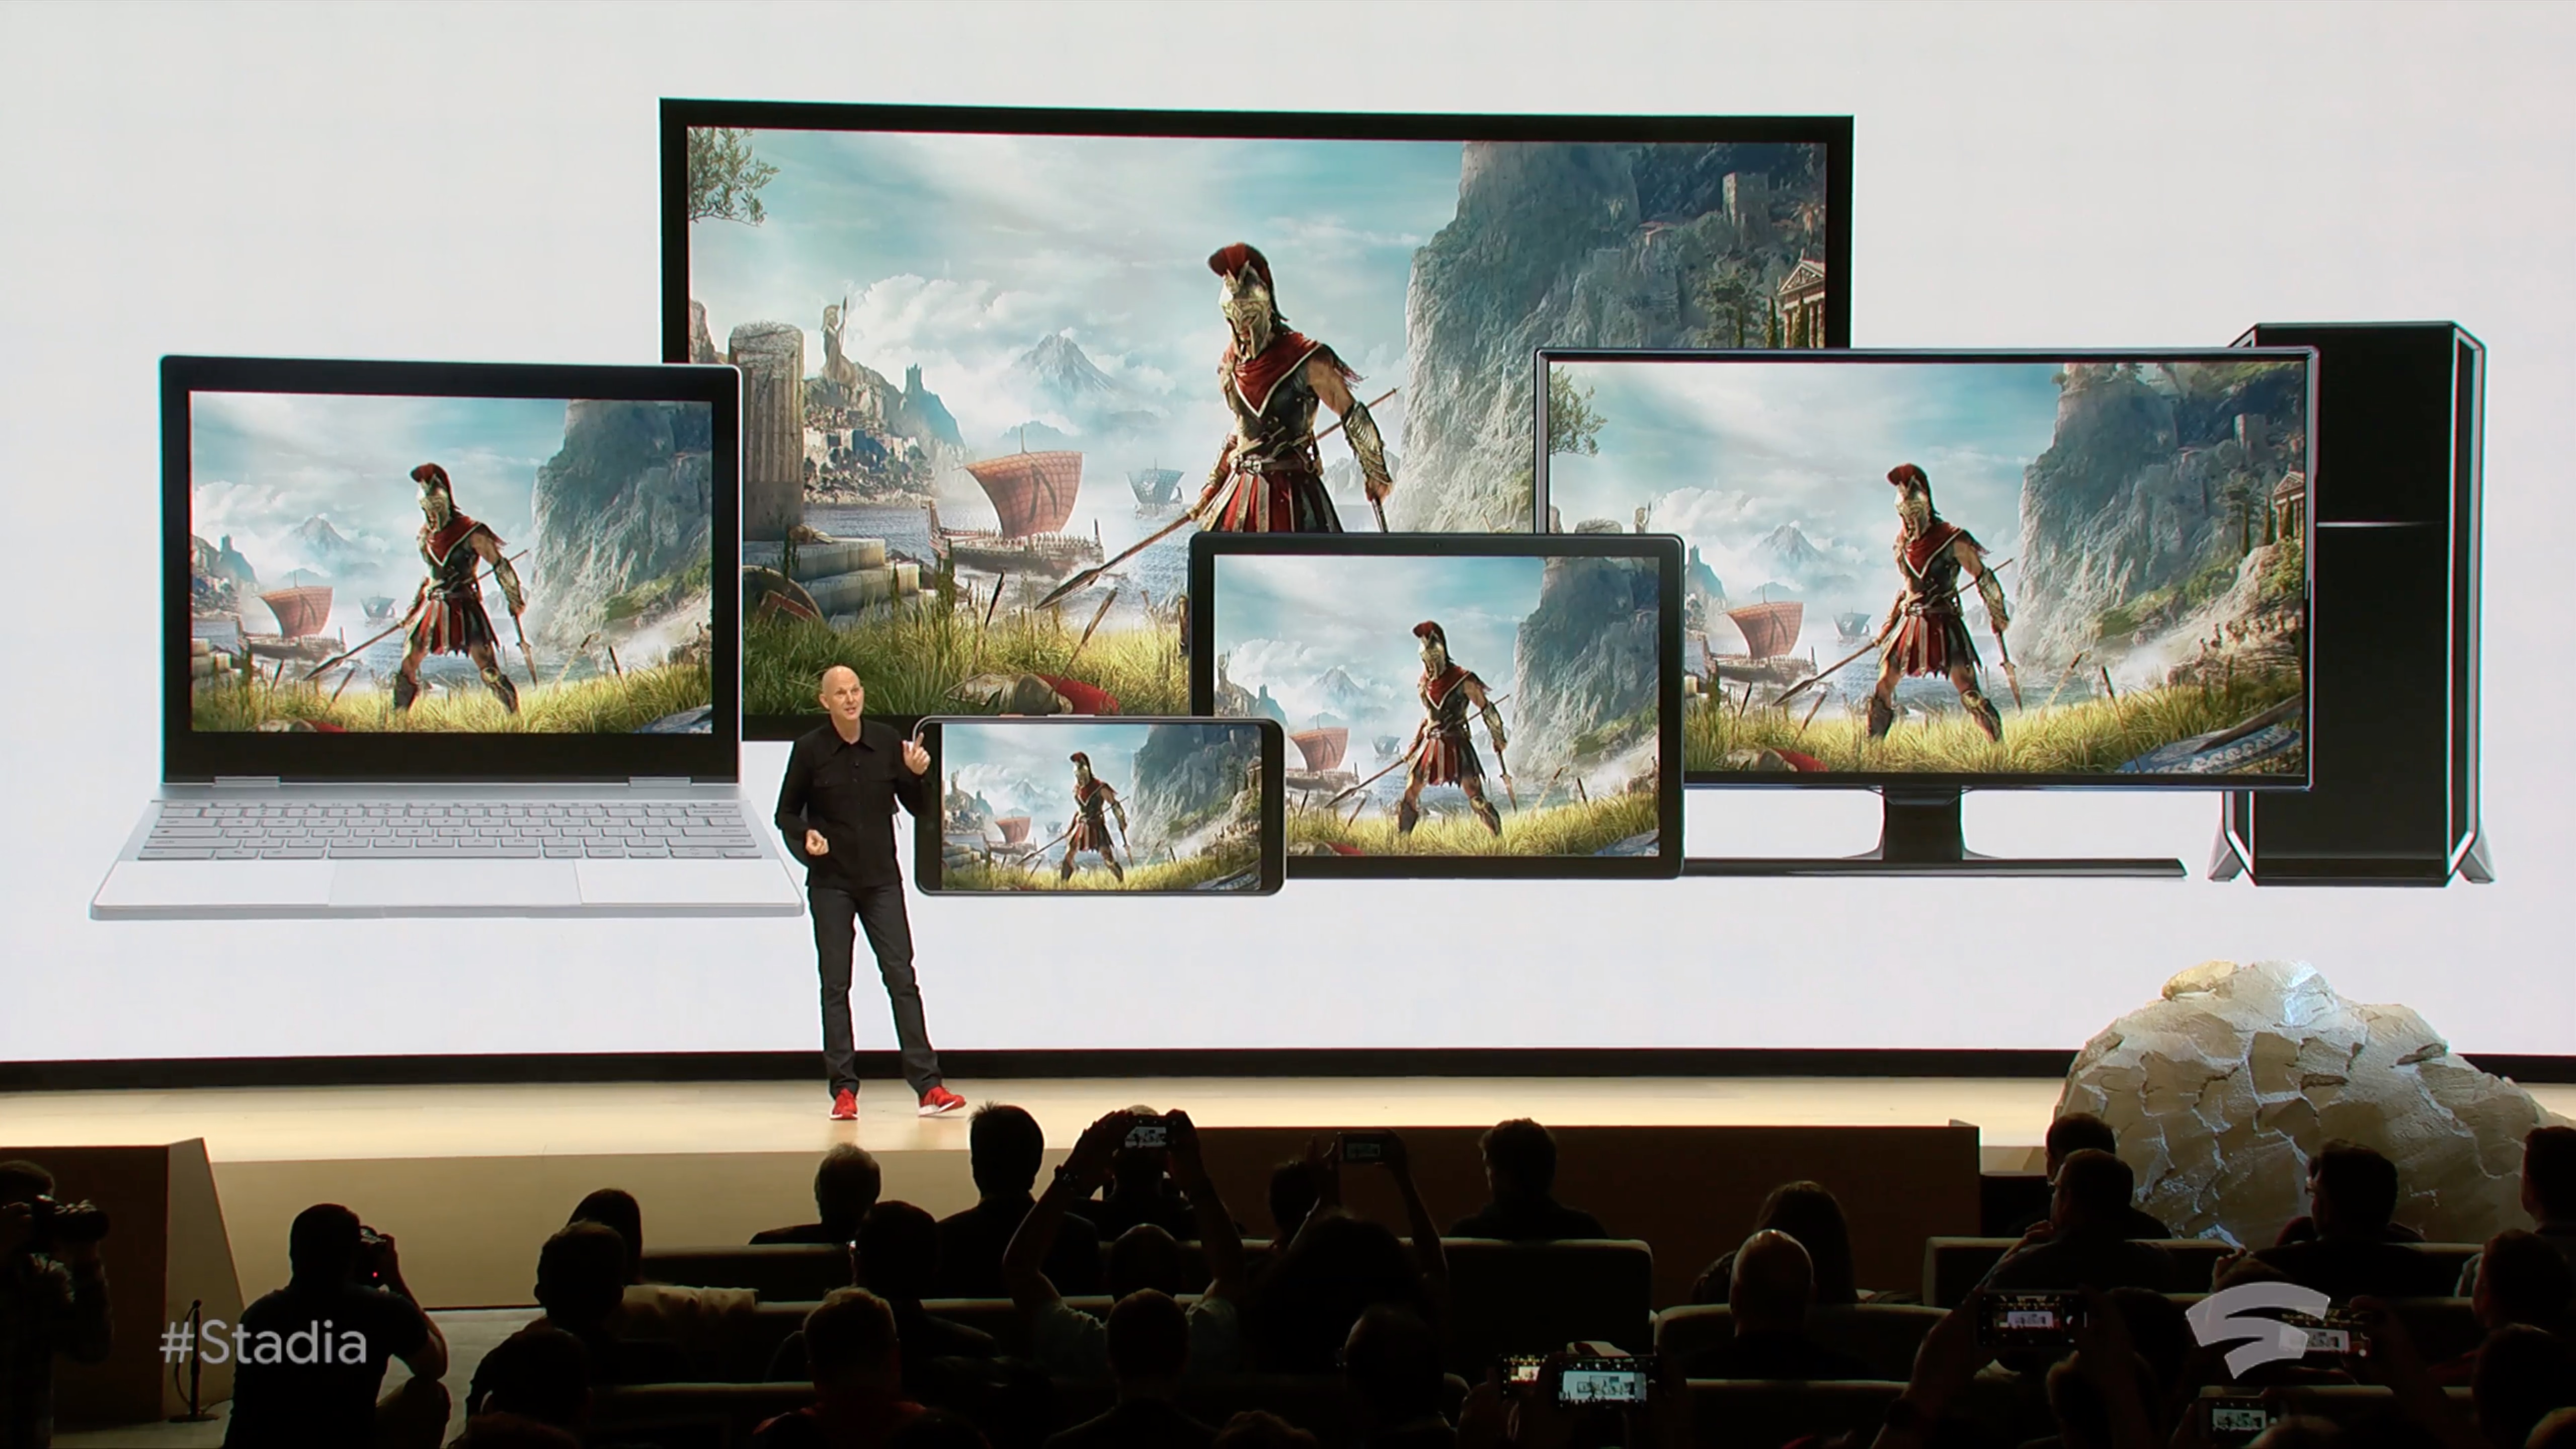 Here’s how you’ll access Google’s Stadia cloud gaming service